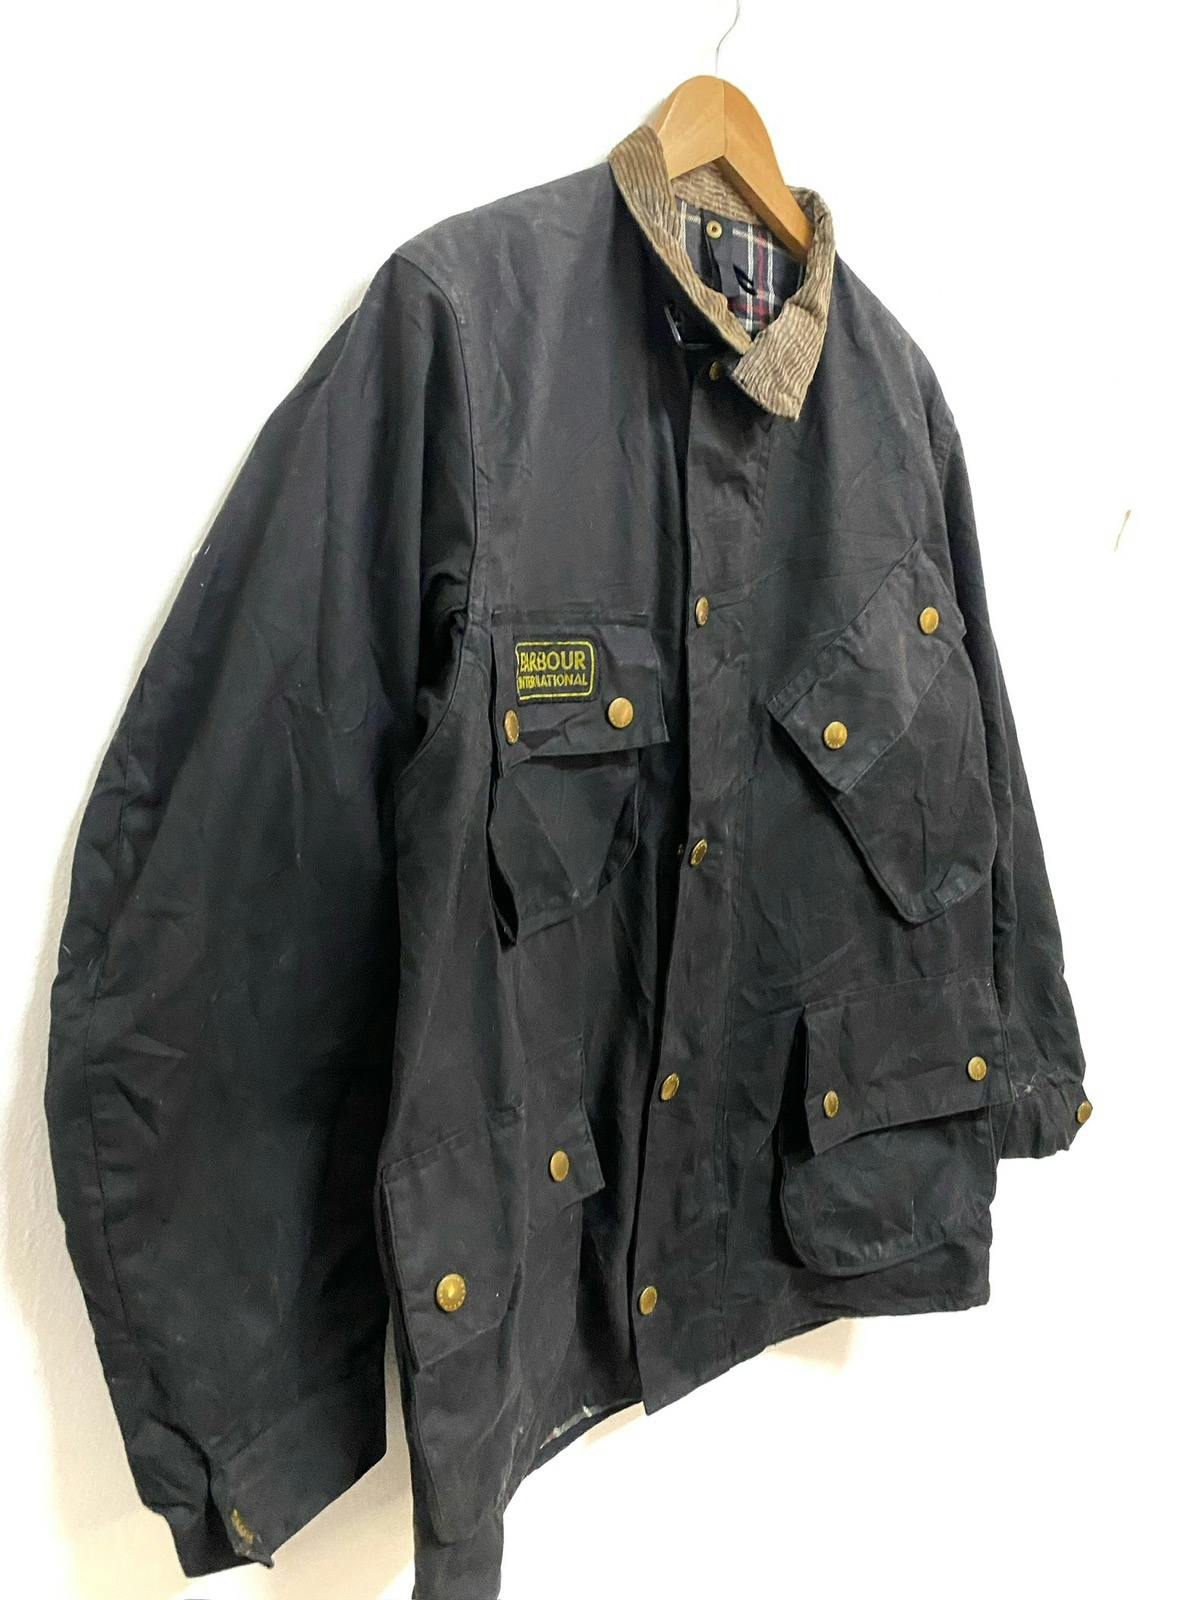 Barbour A7 International Suit Wax Jacket Made in England - 6